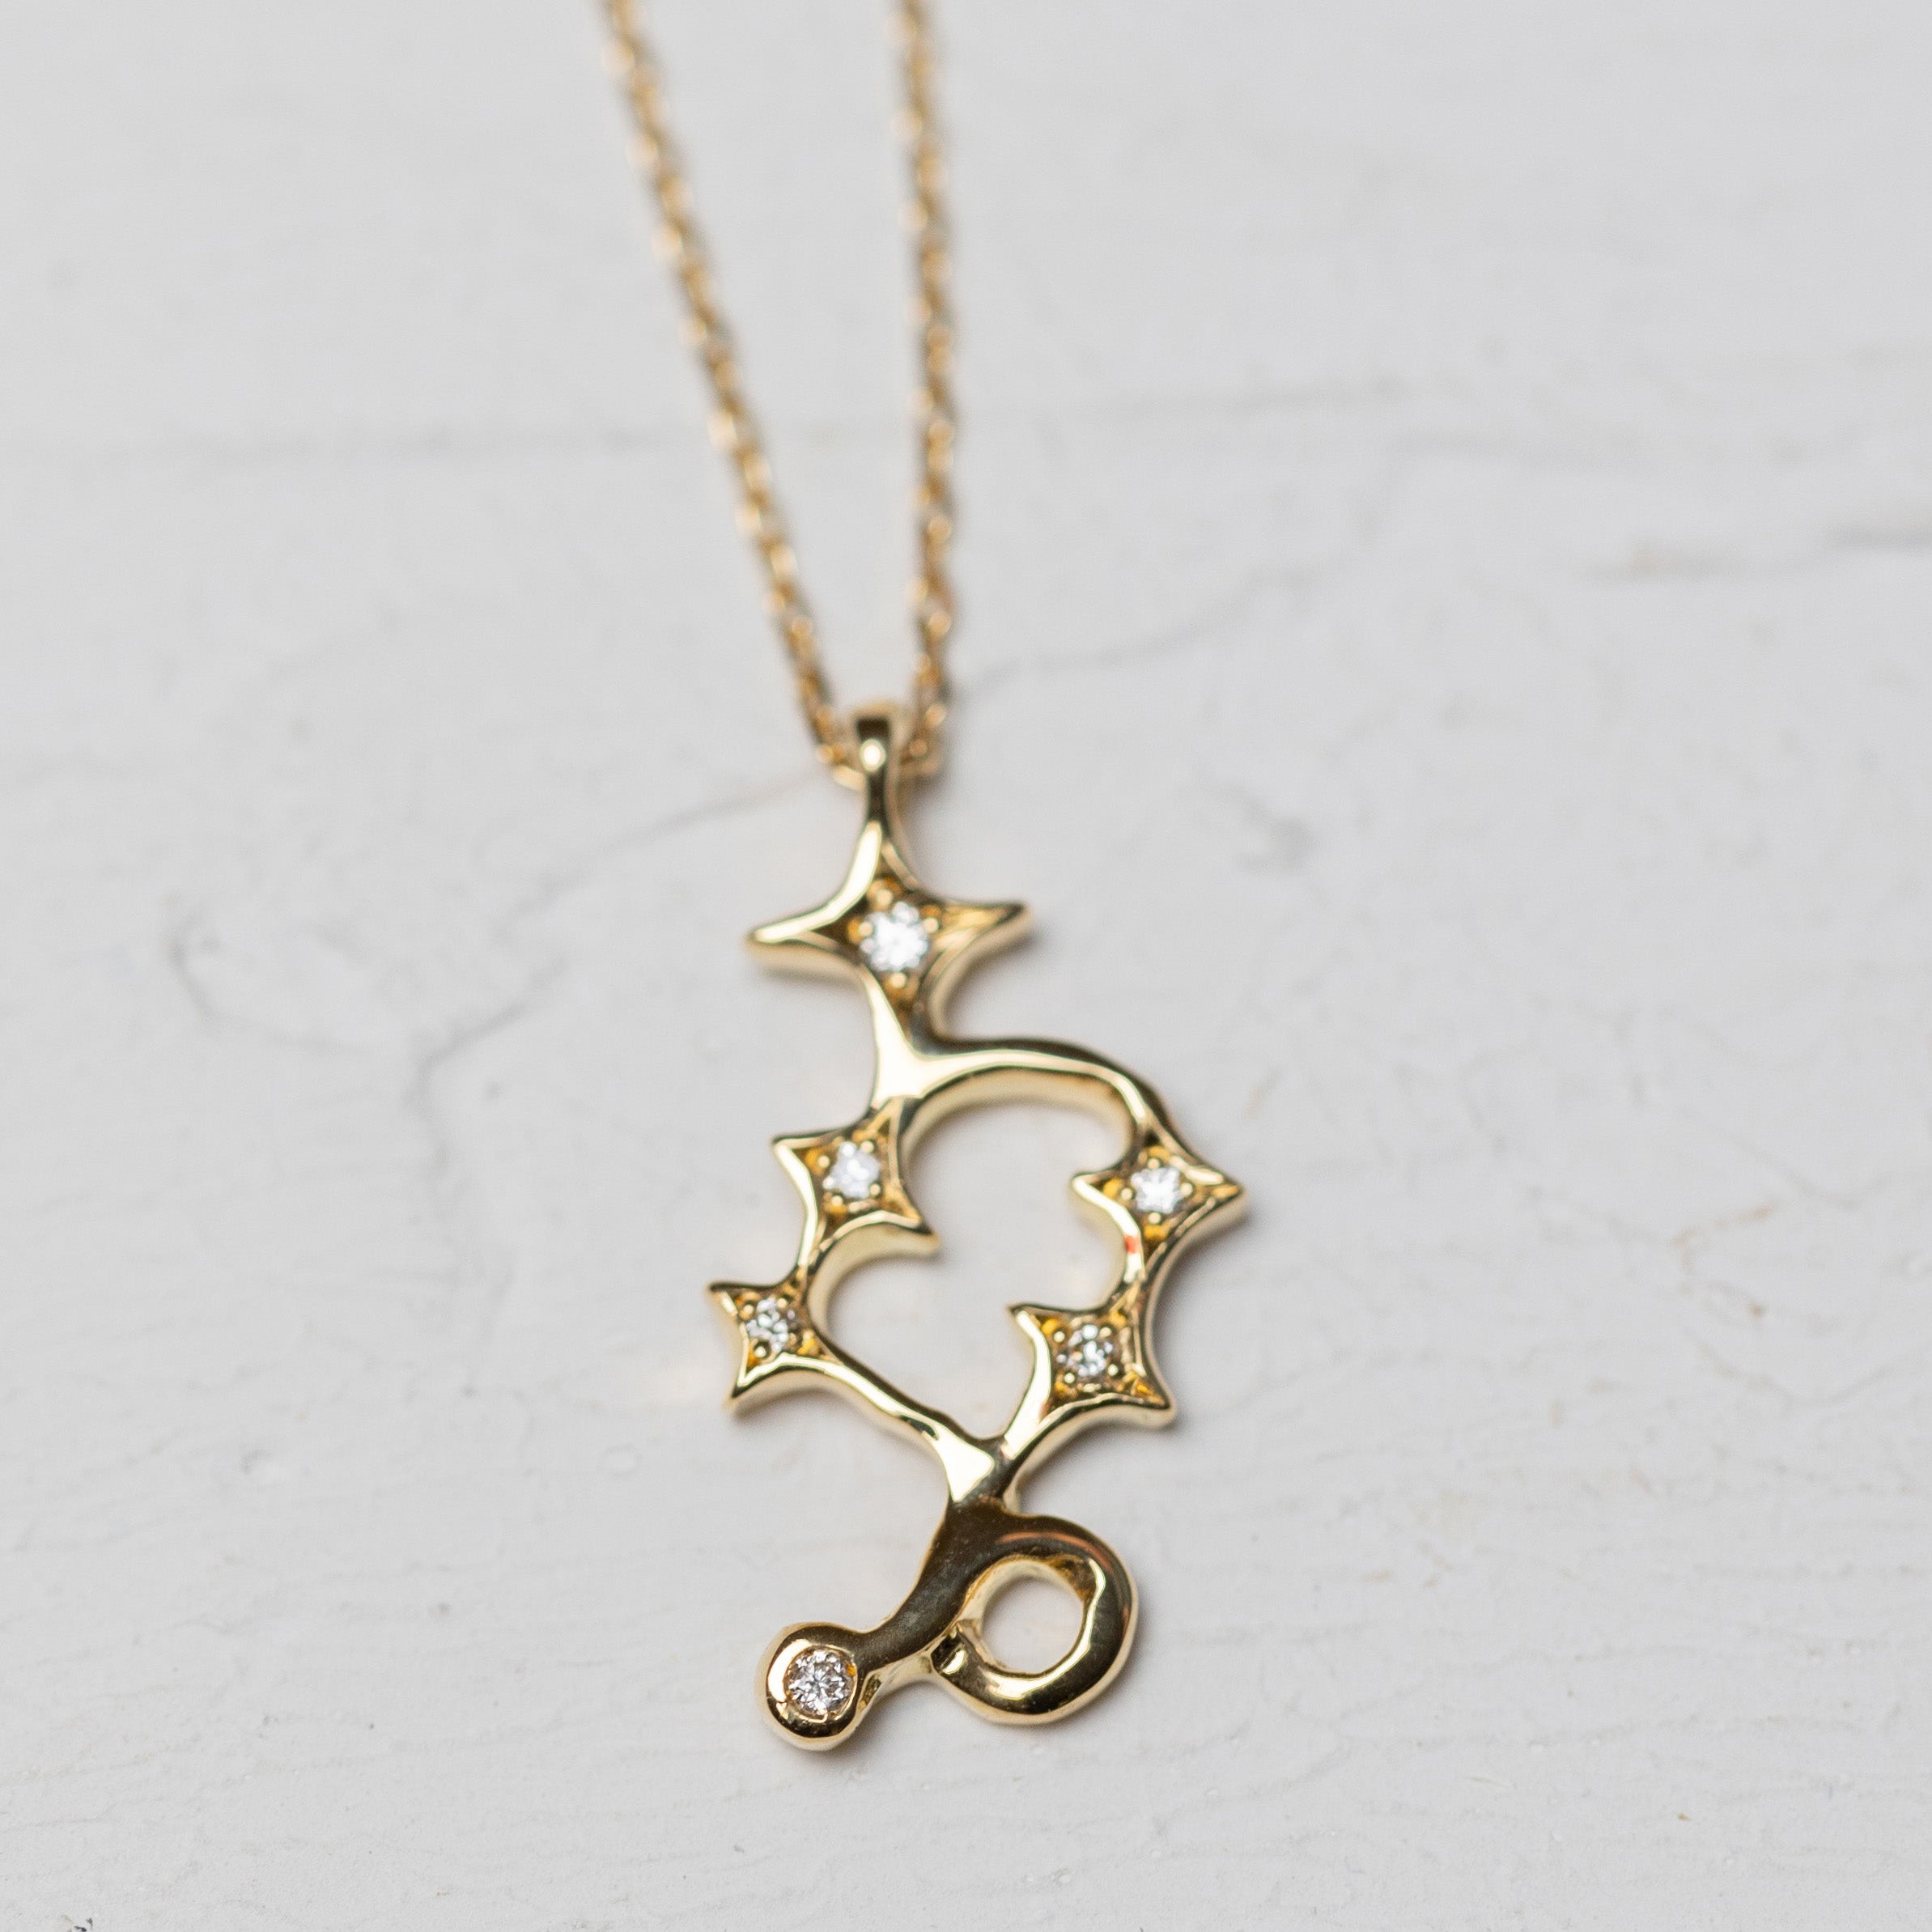 Twinkling Capricorn Necklace